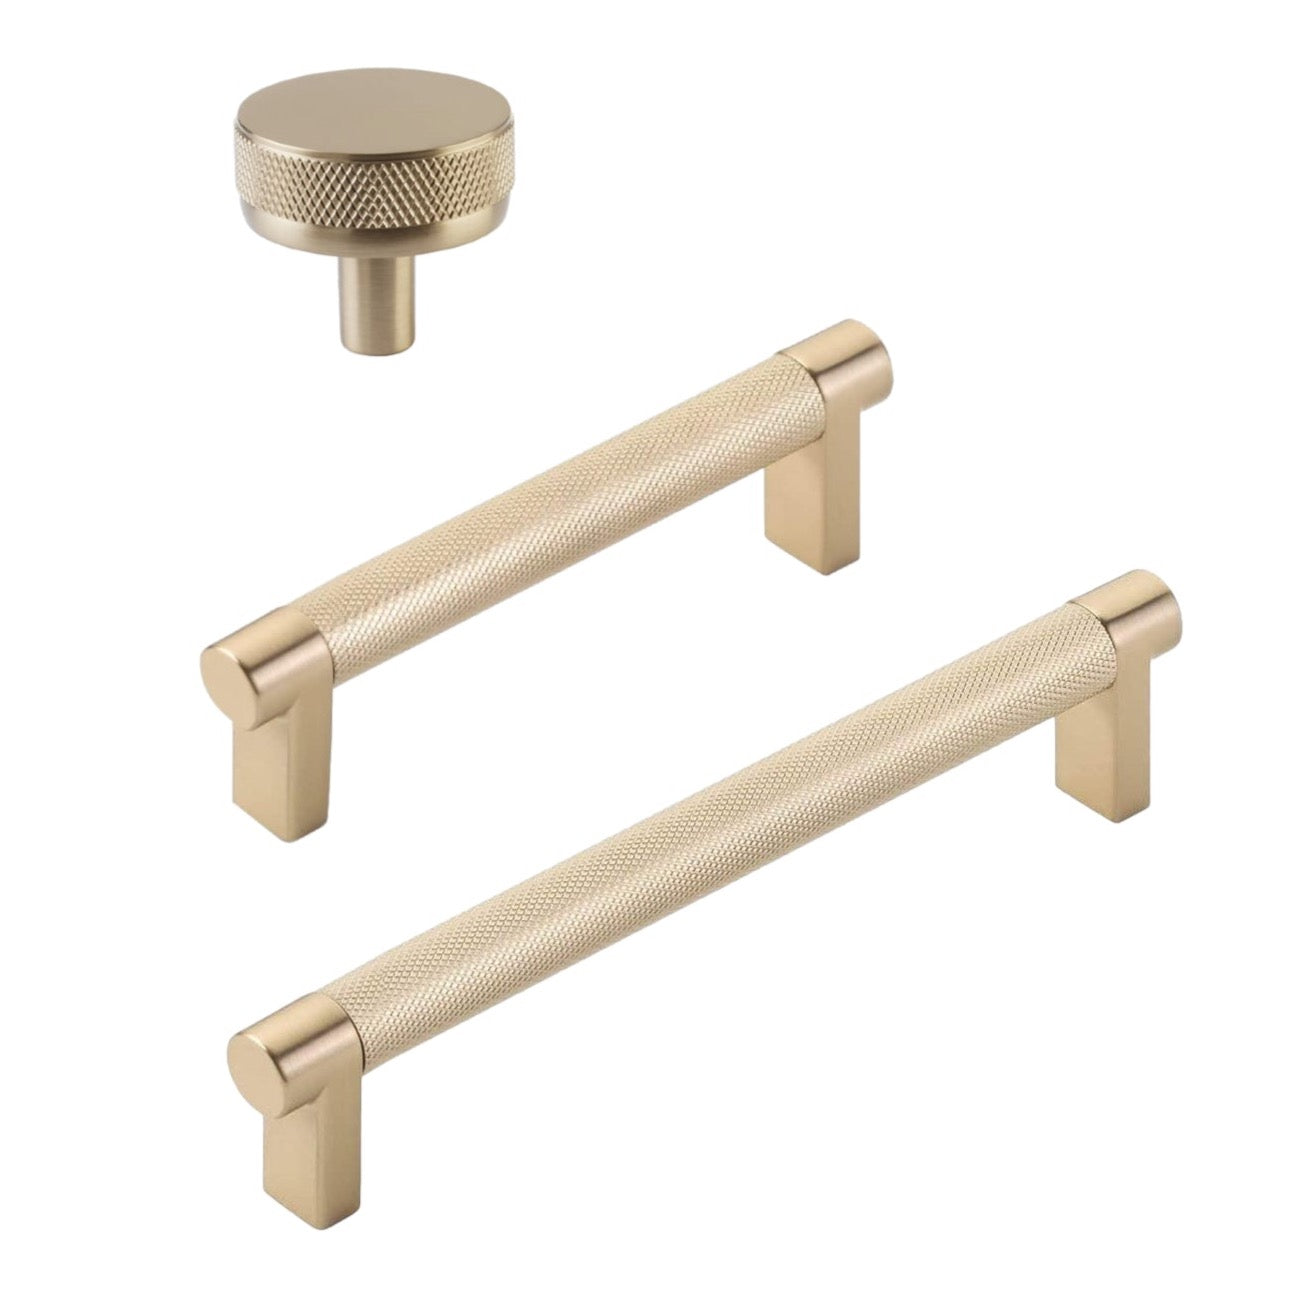 Brushed Brass Finish - Square Bar Series Cabinet & Drawer Hardware - Lew's  Hardware Design Collections